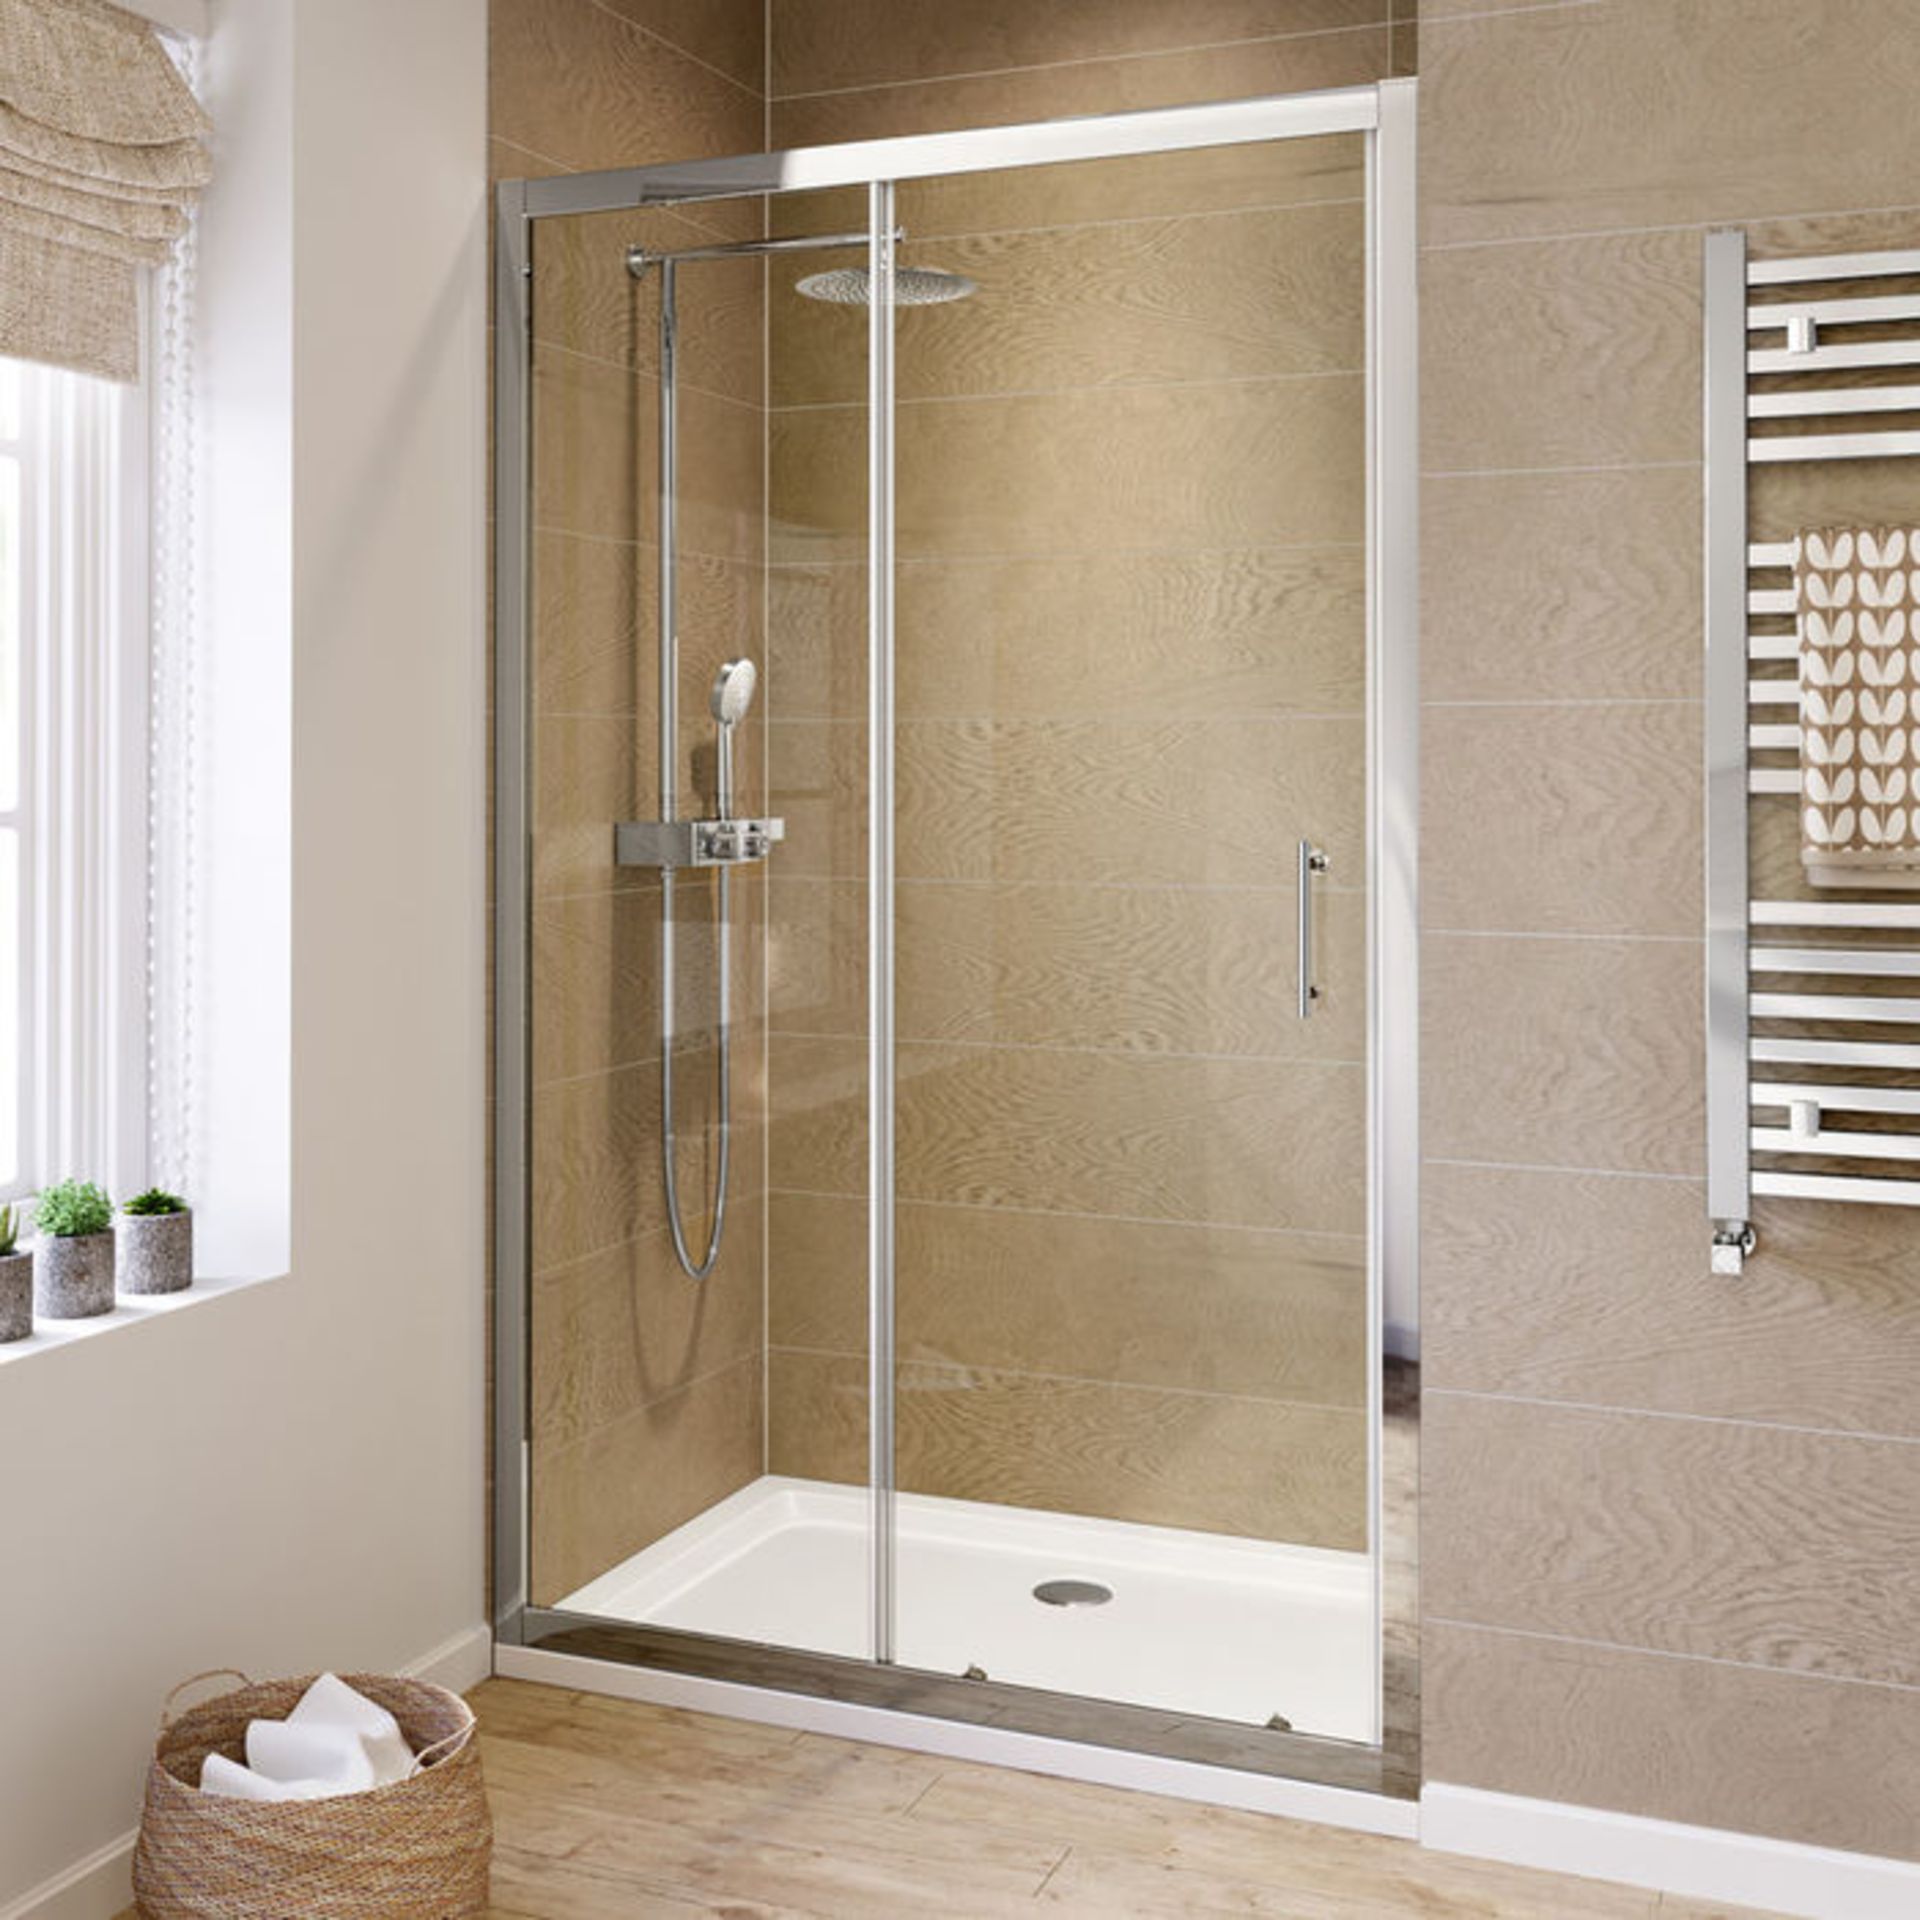 (YC165) 1000mm - 4mm - Elements Sliding Shower Door. RRP £299.99. 6mm Safety Glass Fully - Image 2 of 4